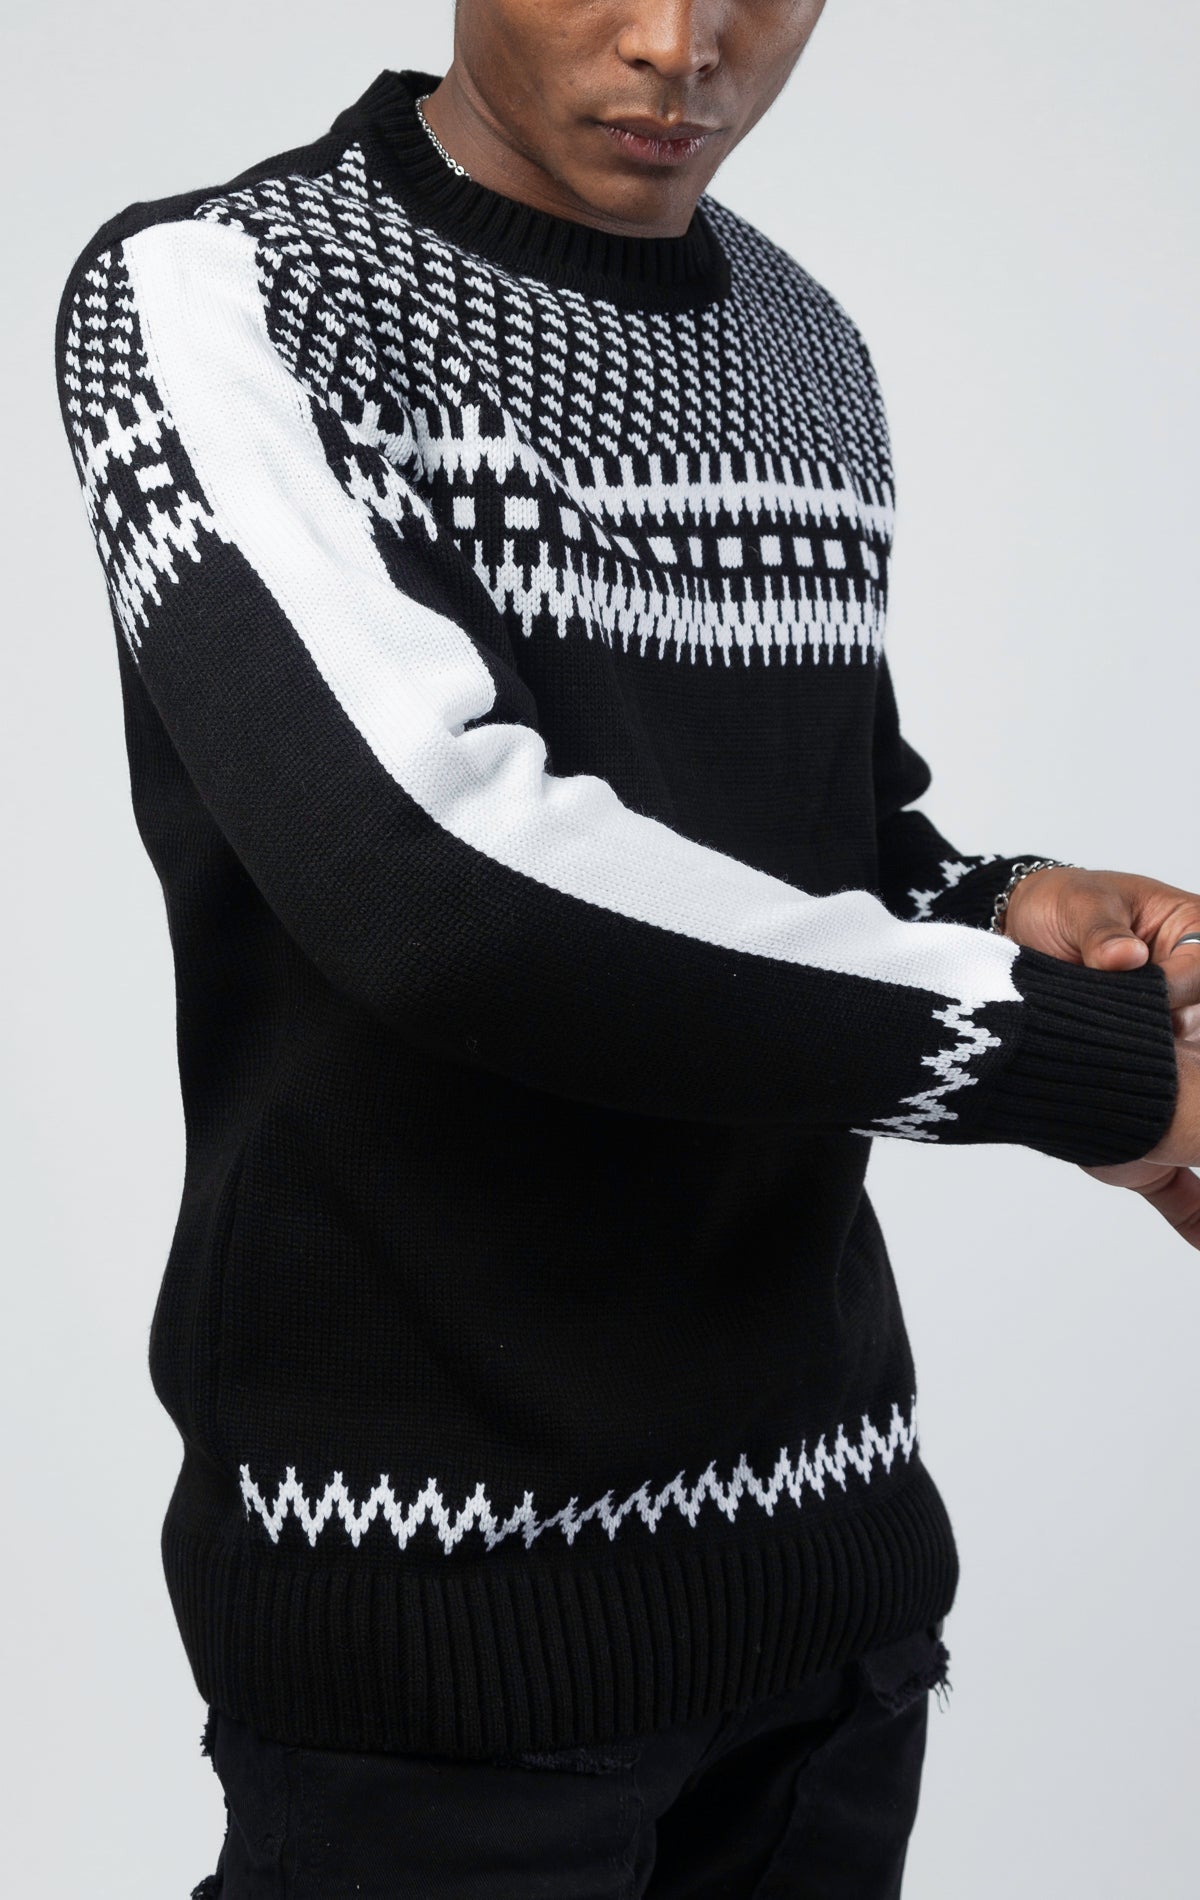 A black and white luxurious sweater with classic knit patterns